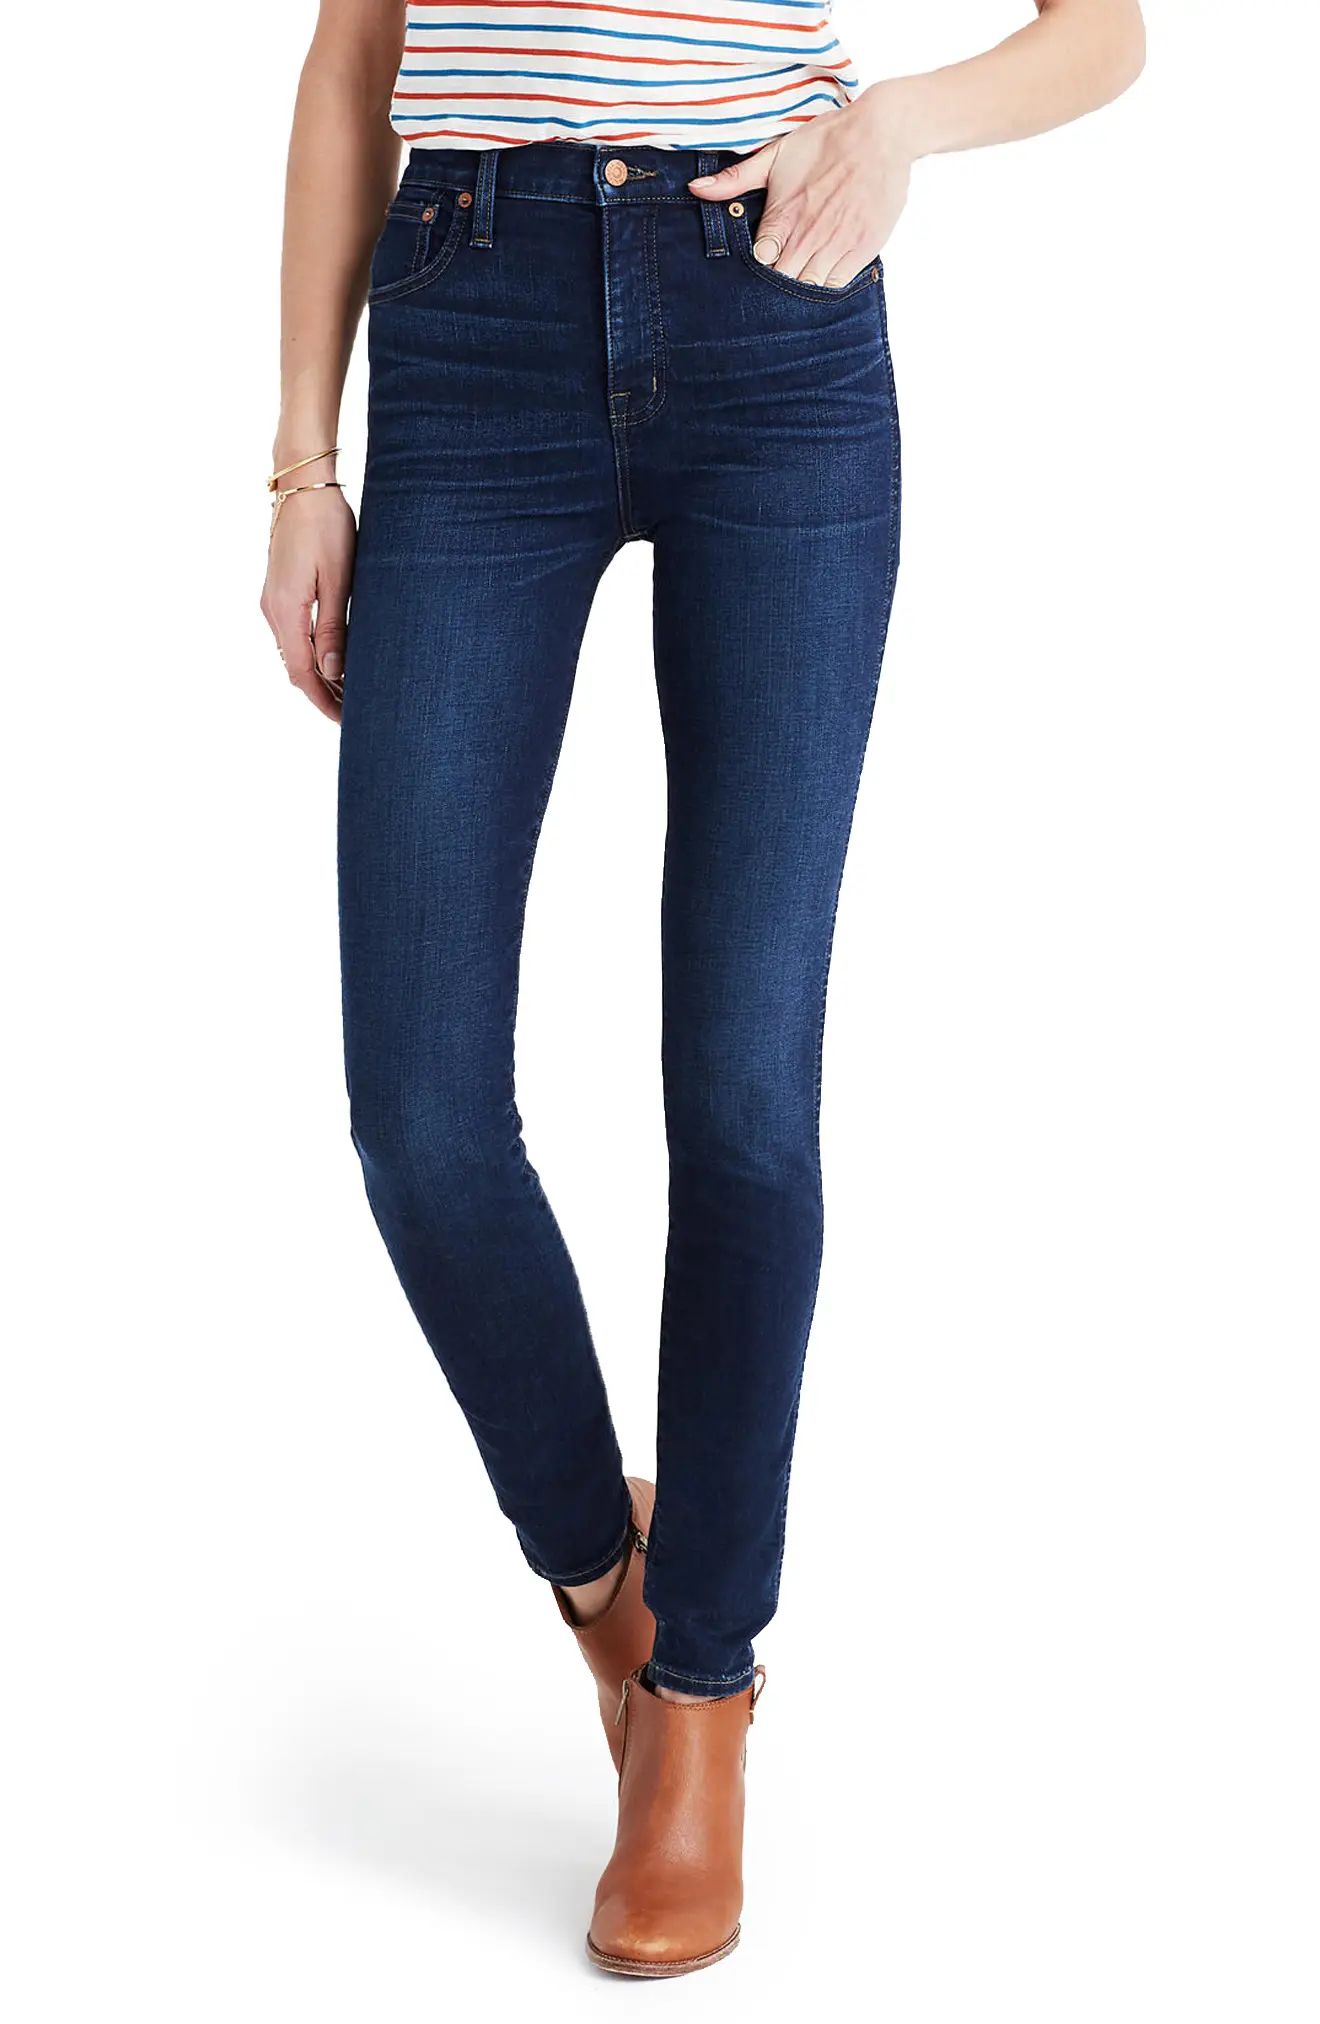 Petite Women's Madewell 10-Inch High Rise Skinny Jeans, Size 33P - Blue | Nordstrom